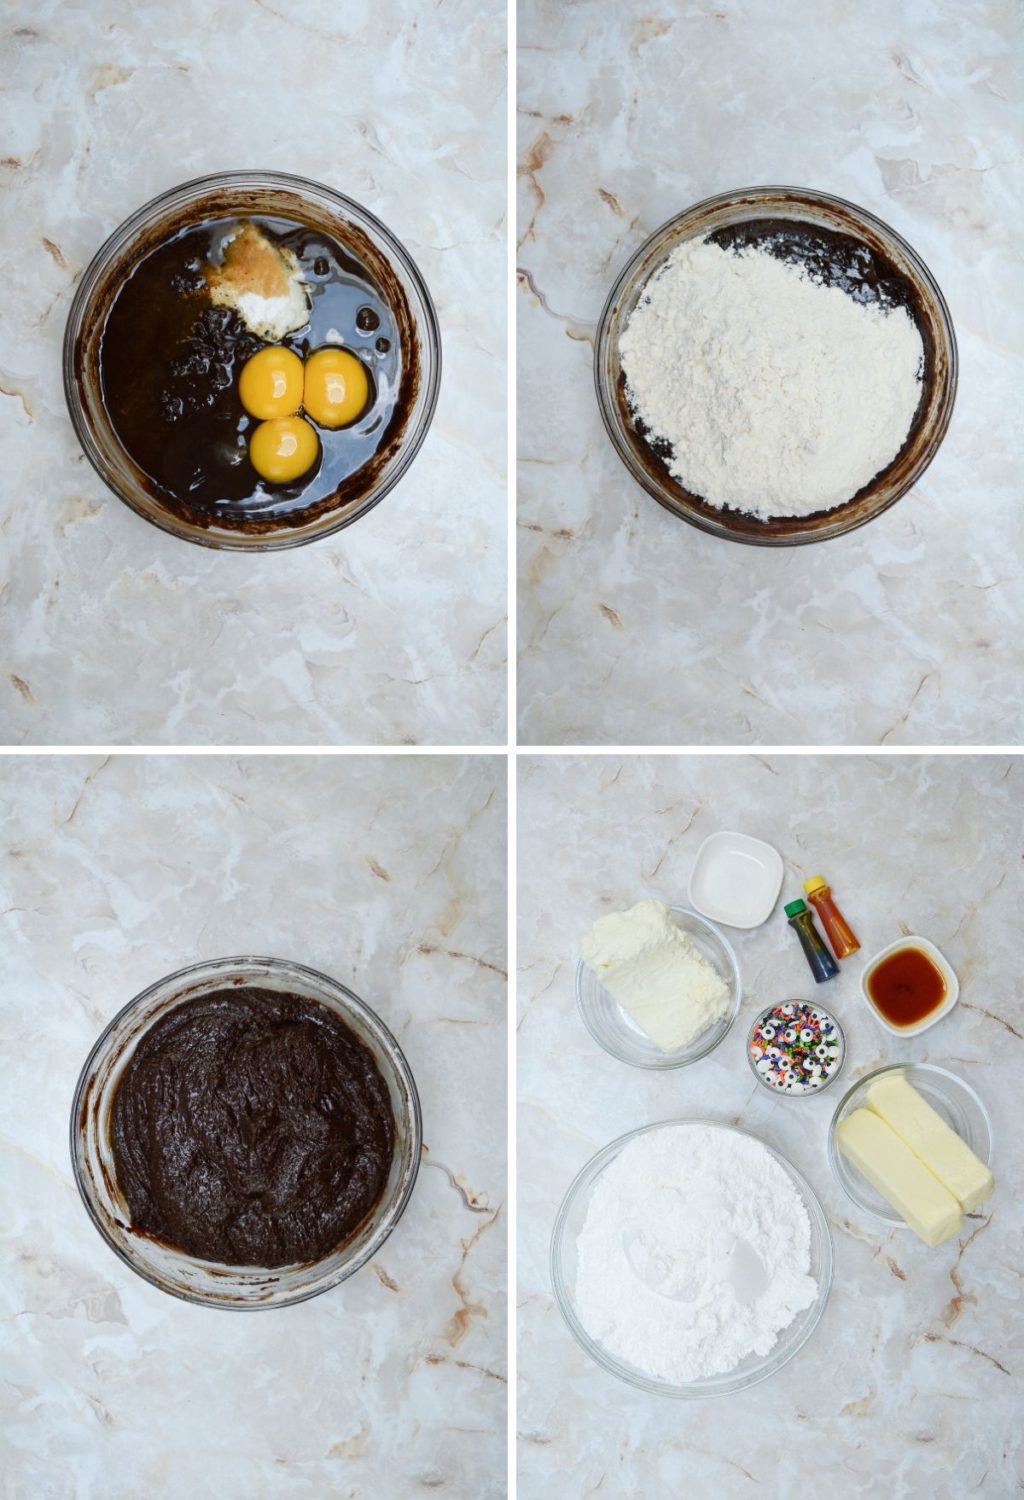 Four pictures showing how to make a chocolate cake.